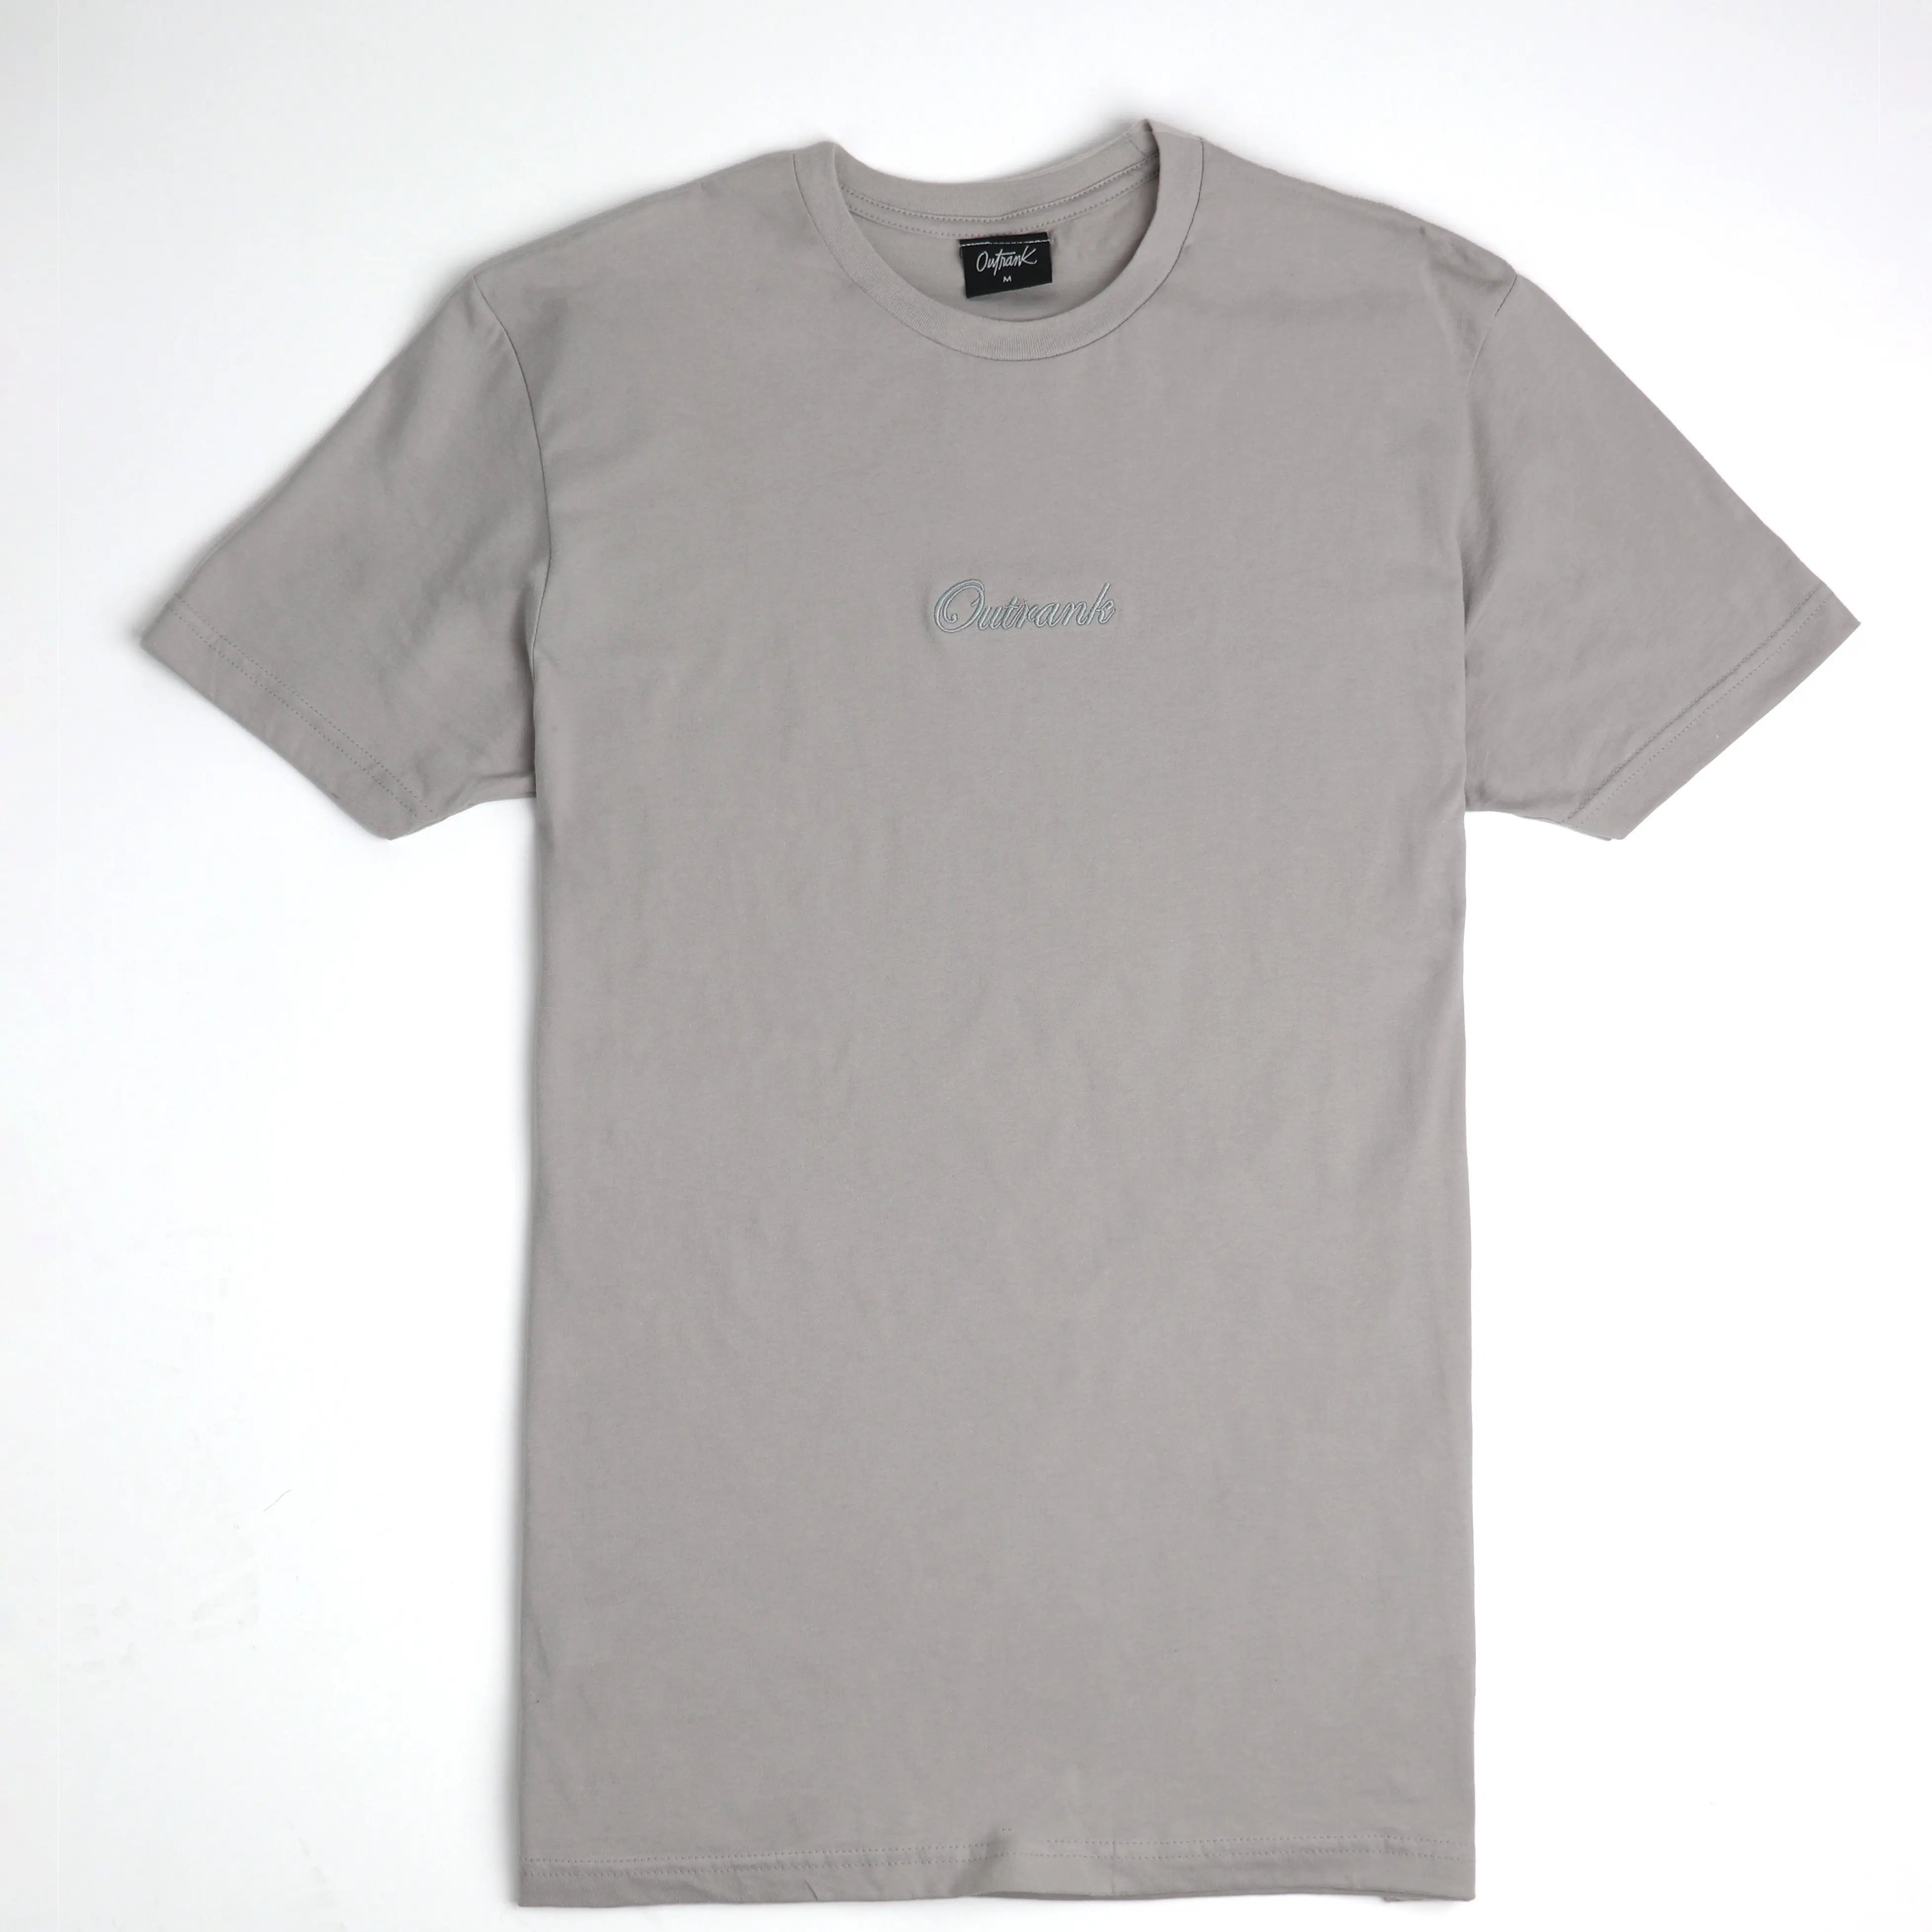 Outrank Everyday Embroidered Light Grey T-Shirt - Outrank